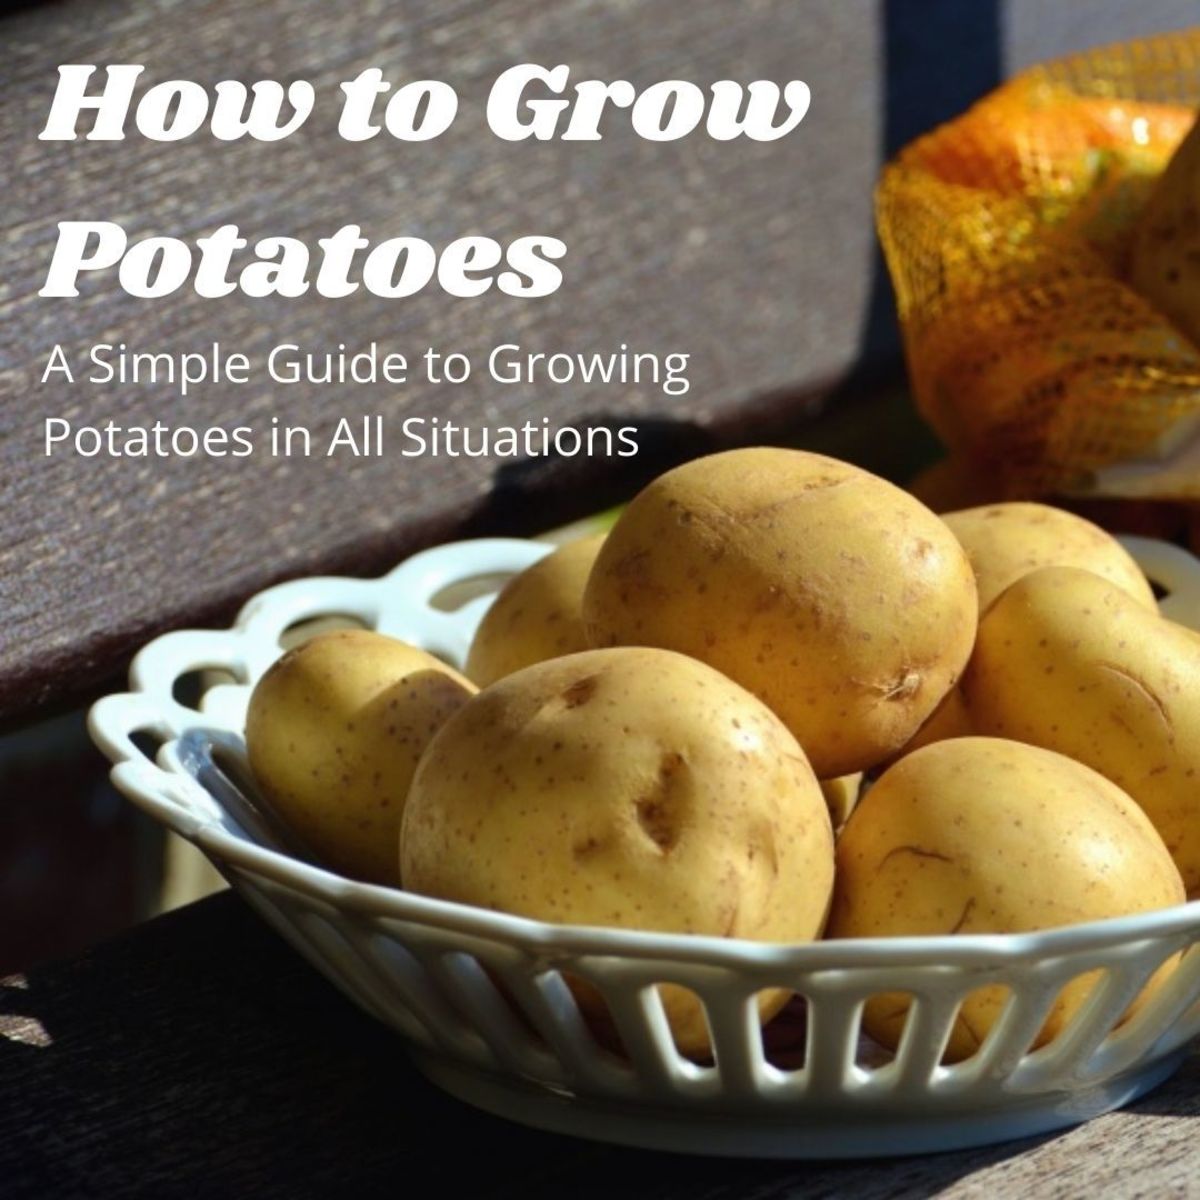 Potatoes are one of the easiest and most abundant foods you can grow. 